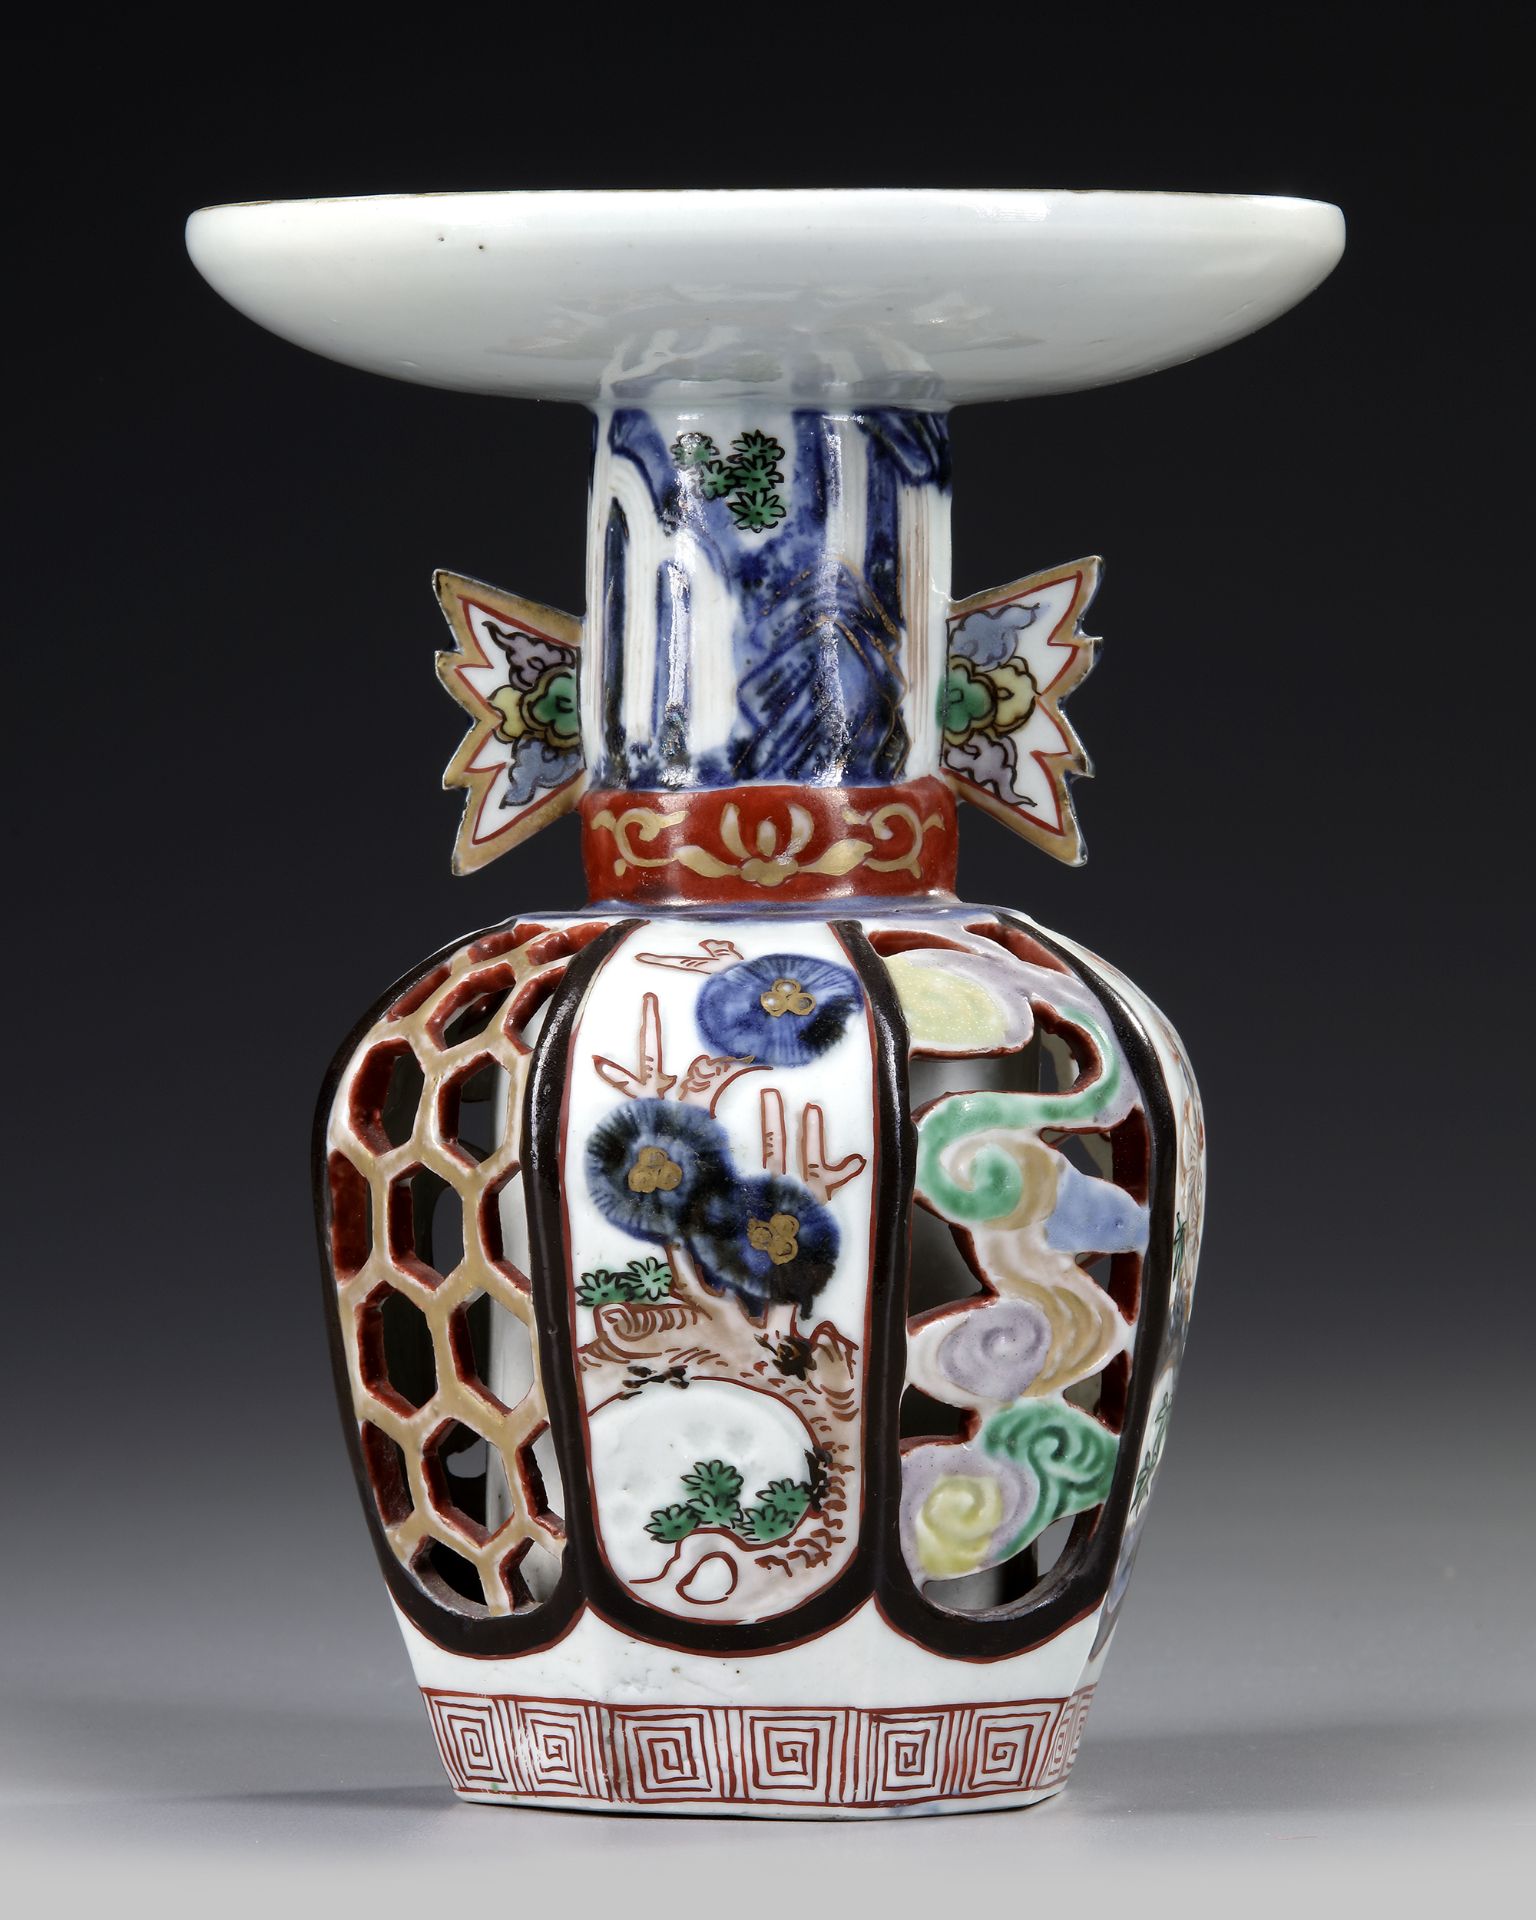 A JAPANESE IMARI DOUBLE-WALLED RETICULATED VASE, 17TH CENTURY - Image 2 of 4